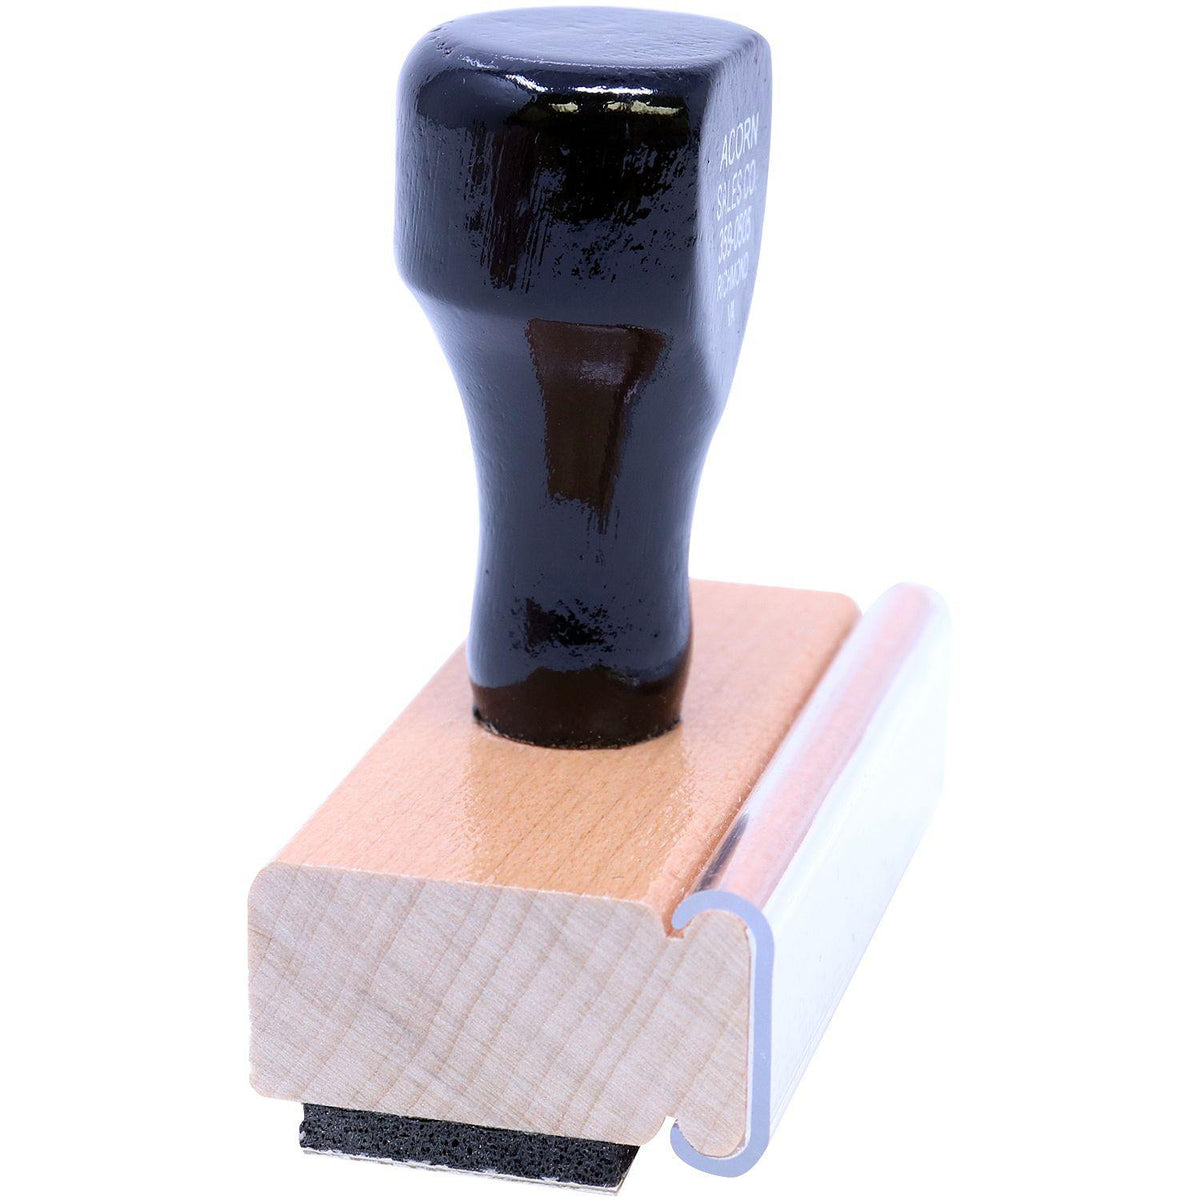 Narrow Copy for your Information Rubber Stamp - Engineer Seal Stamps - Brand_Acorn, Impression Size_Small, Stamp Type_Regular Stamp, Type of Use_General, Type of Use_Office